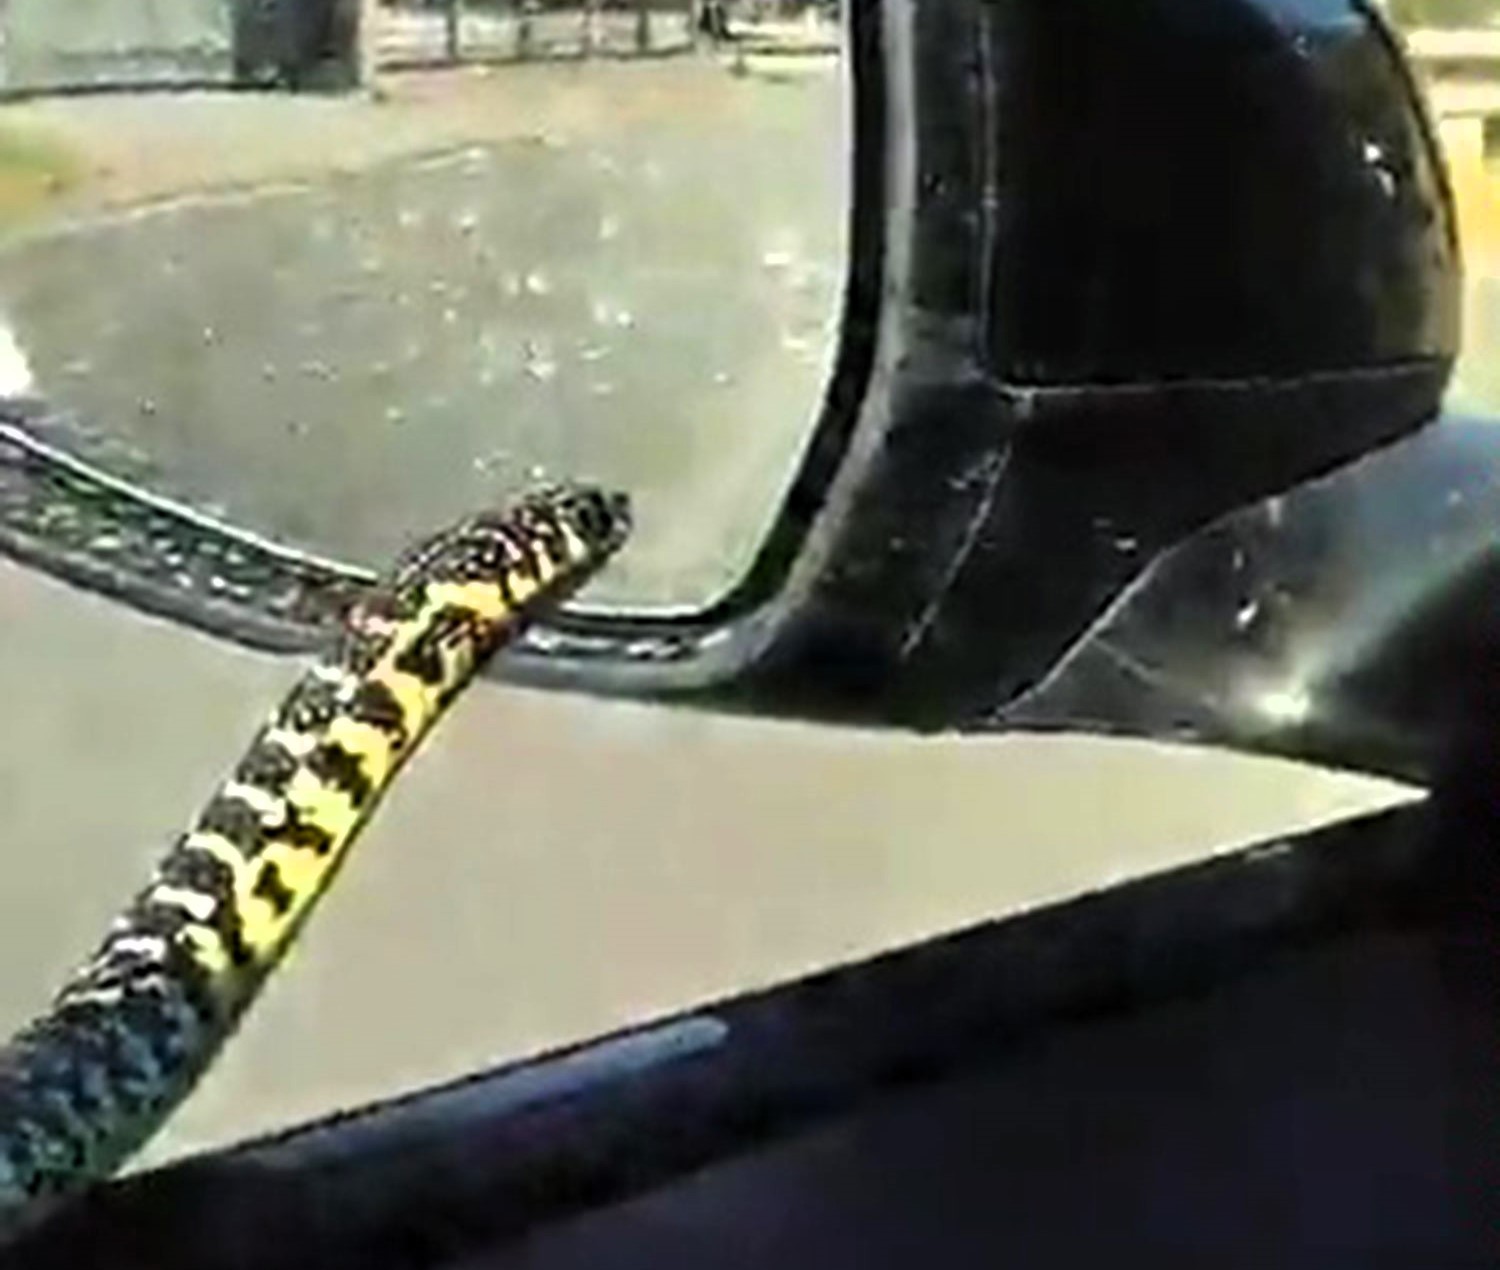 Driver Pietro Mastrosanti was shocked to find a snake slithering along his car door in Anagni, Italy. He filmed the bizarre encounter before the snake entered the car.